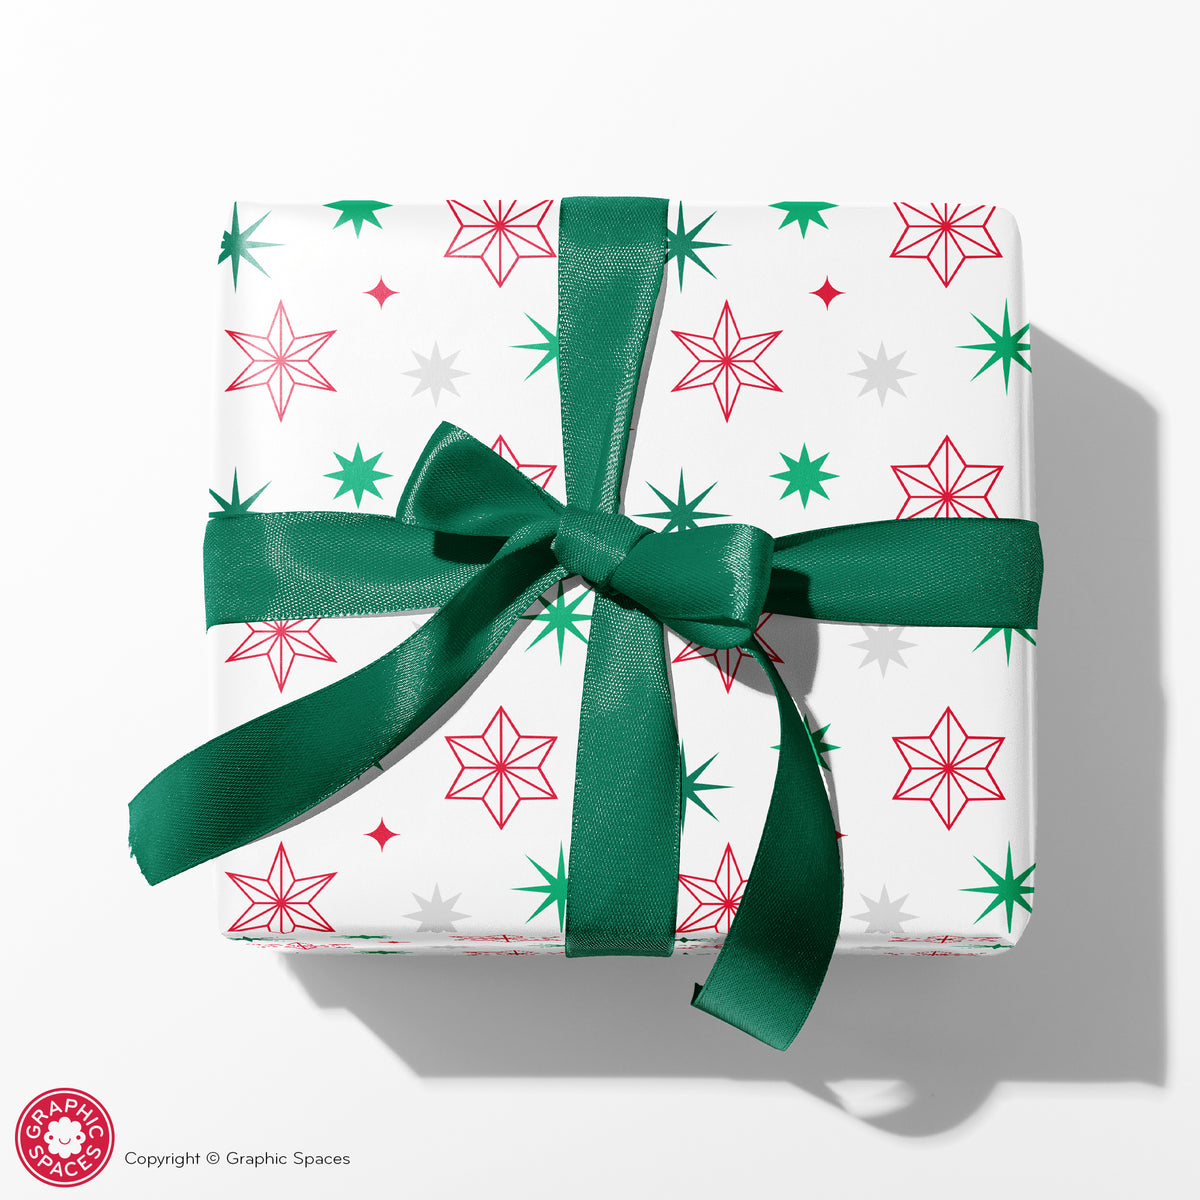 Christmas Star Wrapping Paper - RED &amp; BRIGHT GREEN